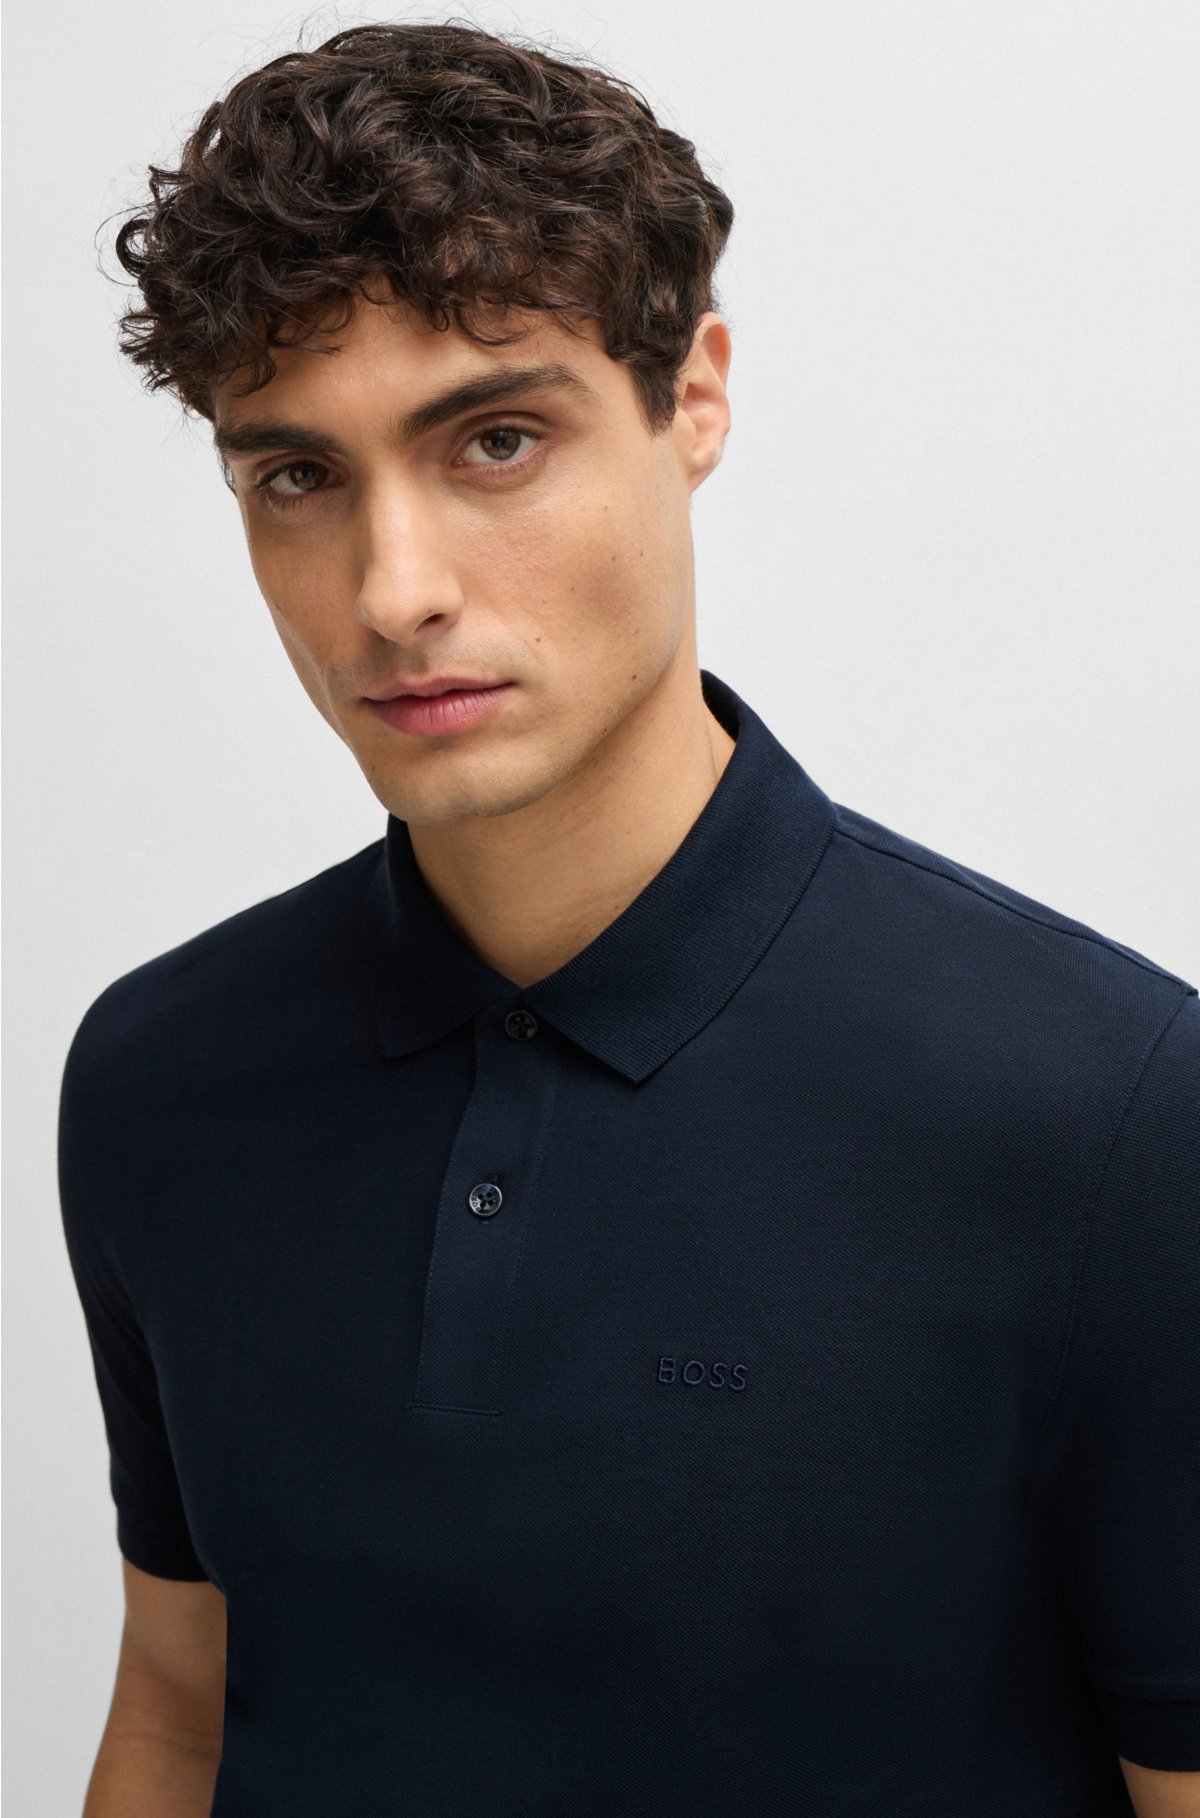 BOSS - Polo shirt logo with embroidered